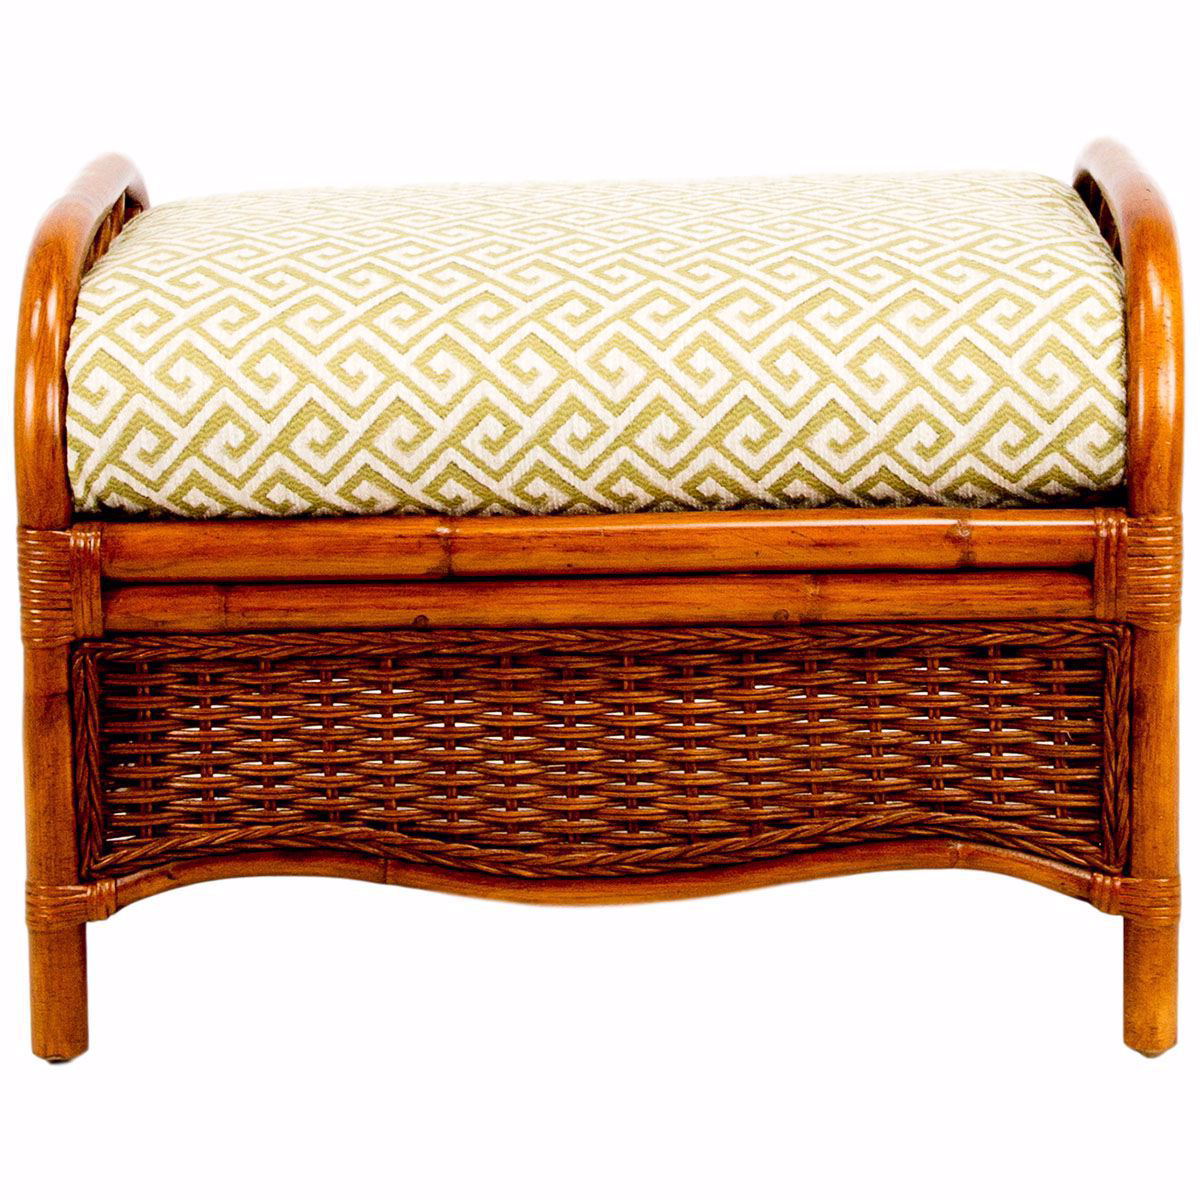 Picture of Everglade Ottoman